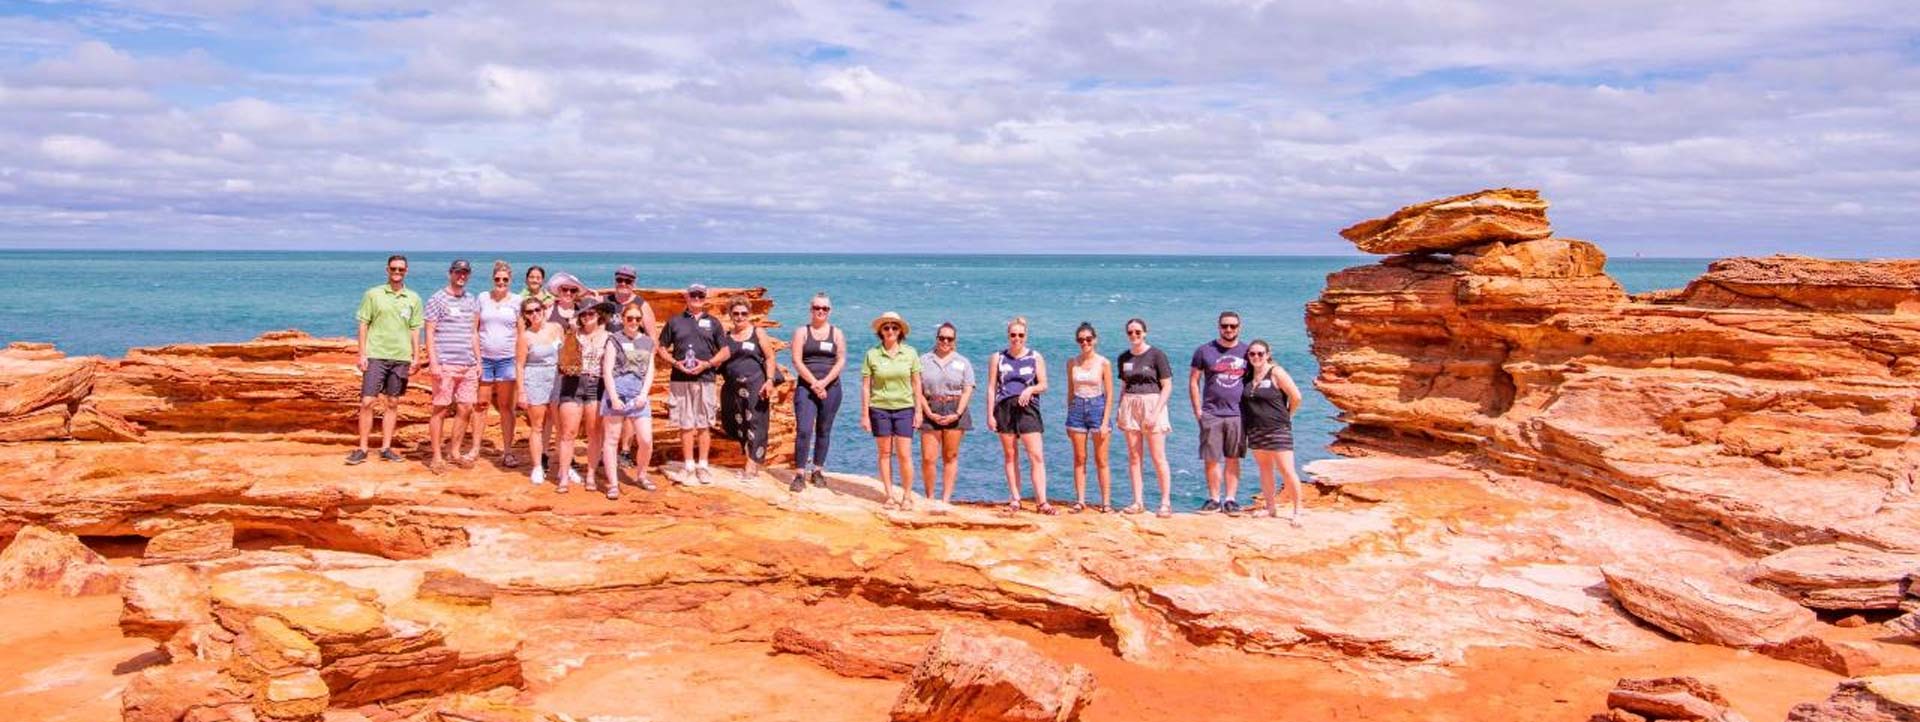 BROOME-TOWN-MORNING-TOURS-group-photo-on-rocks